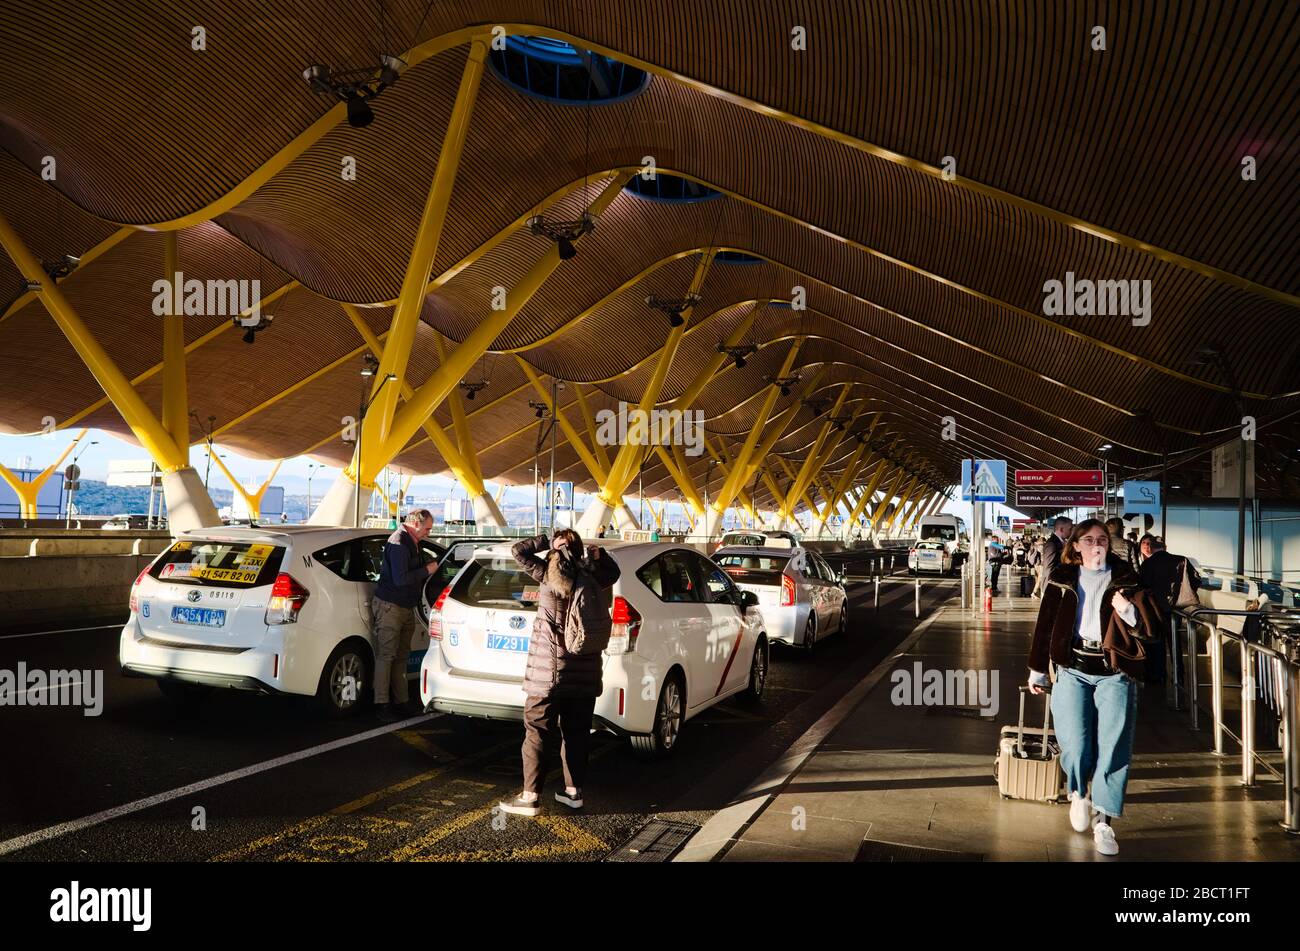 Madrid, Span - January, 2020: People arriving in taxi car on drop off parking and going with luggage to the Madrid Barajas International Airport. Stock Photo